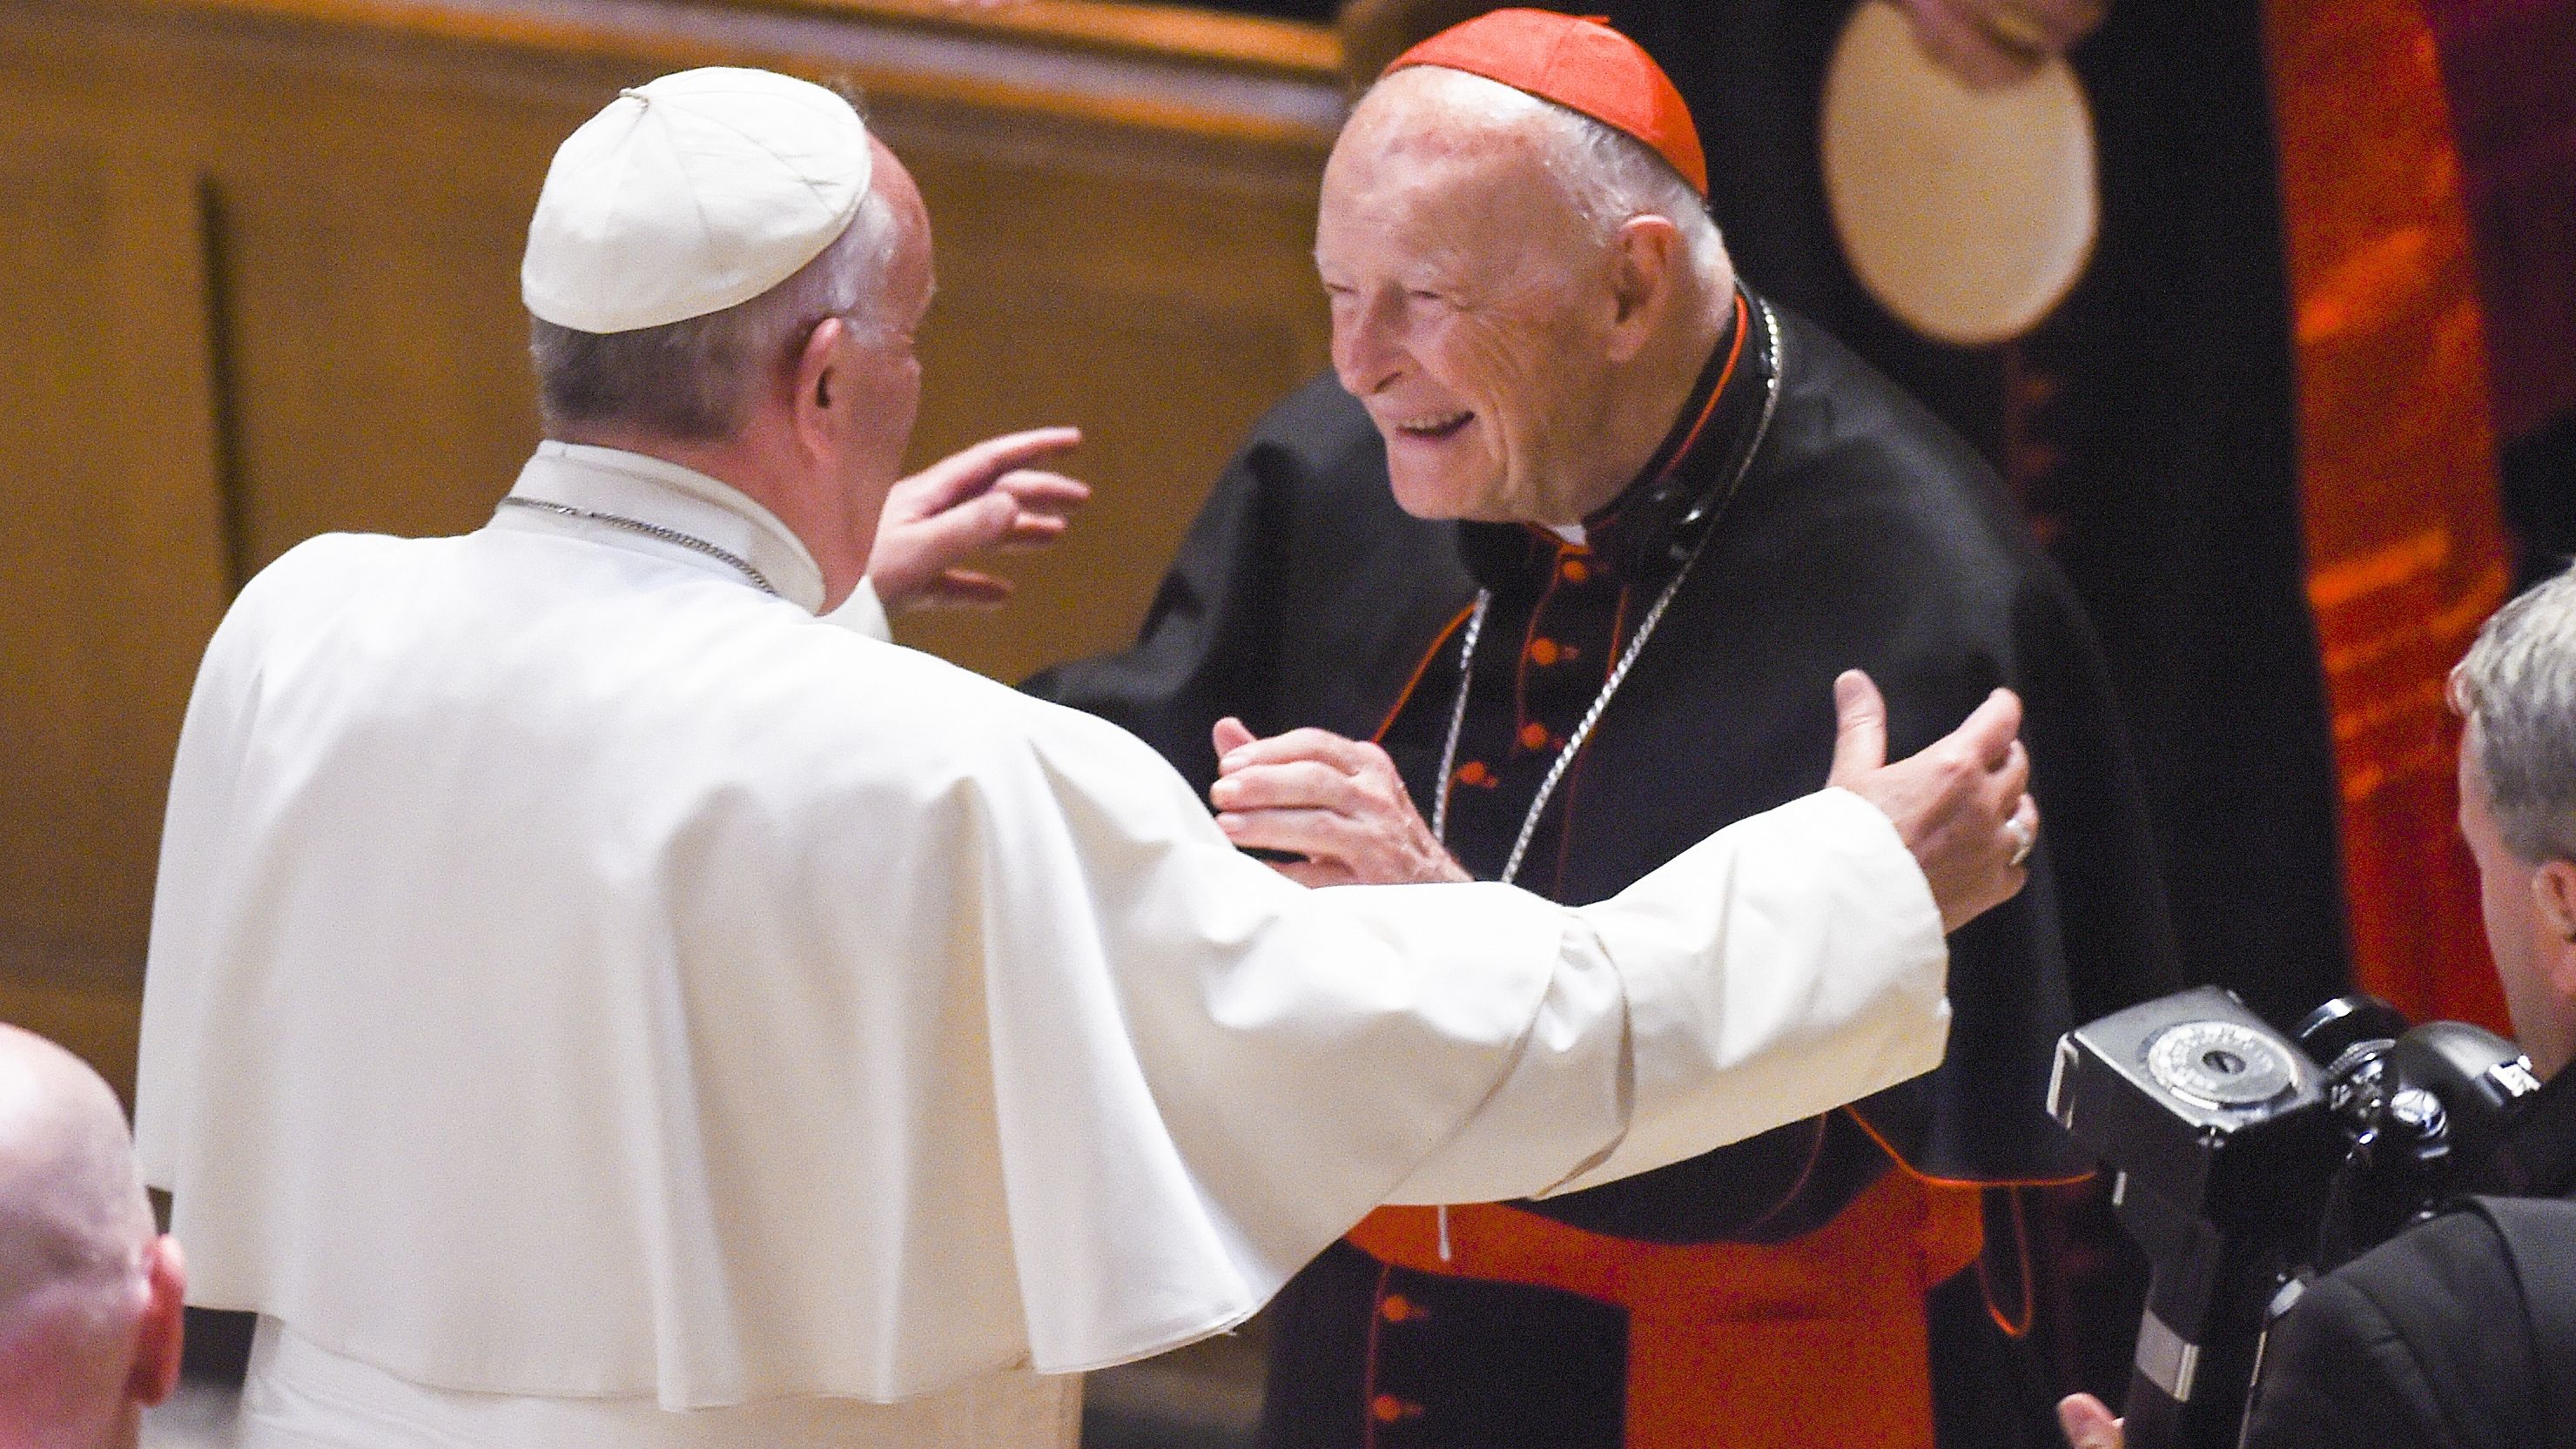 Theodore McCarrick, center, greets Pope Francis in 2015 at the Cathedral of St. Matthew in Washington